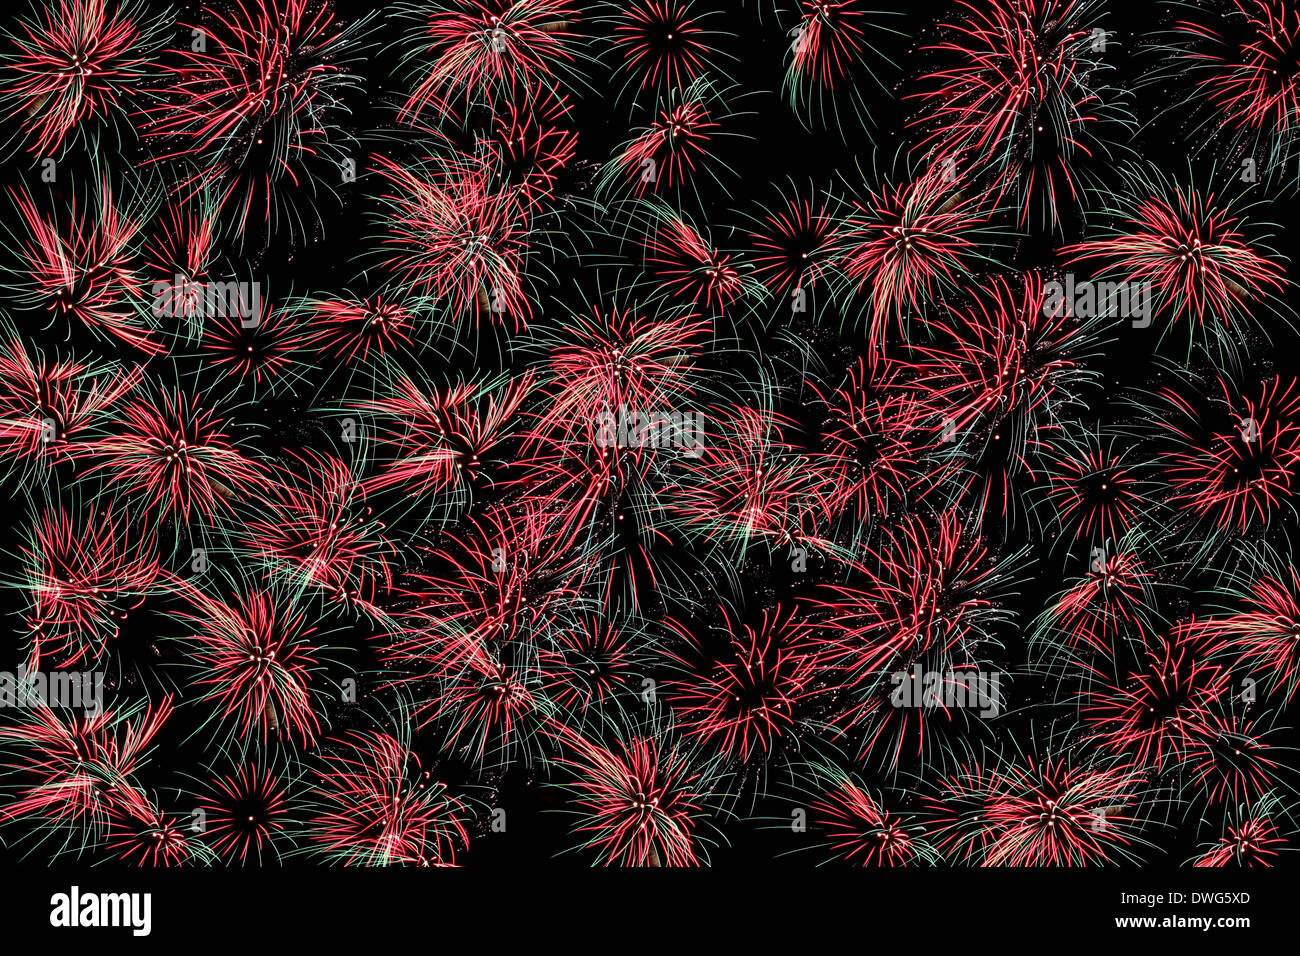 Variety of colors Mix Fireworks or firecracker in the darkness. Stock Photo